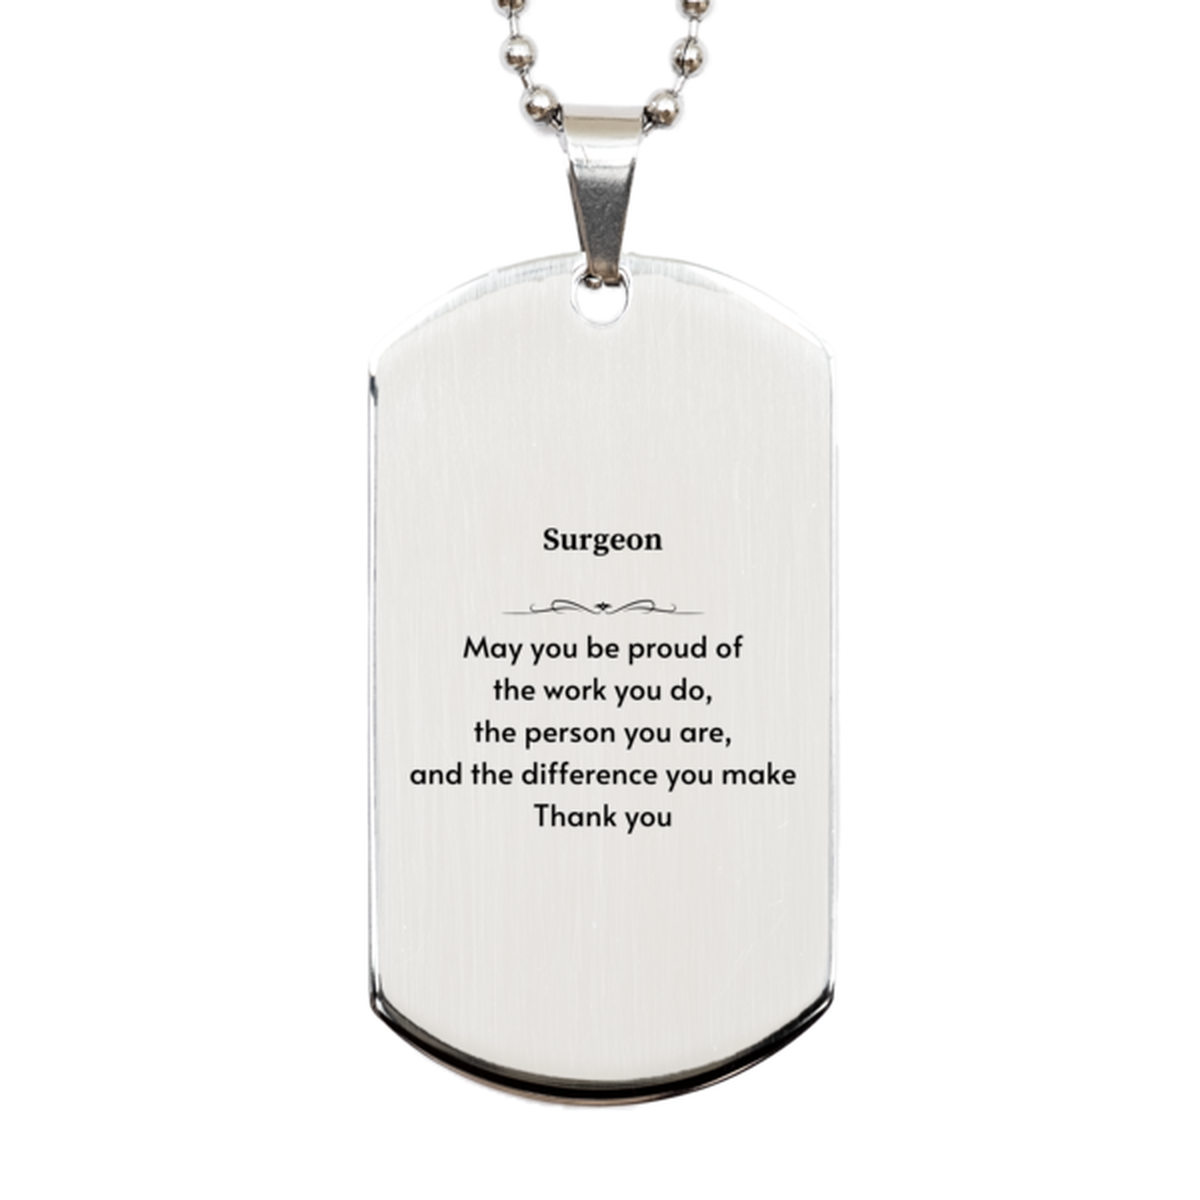 Heartwarming Silver Dog Tag Retirement Coworkers Gifts for Surgeon, Surgeon May You be proud of the work you do, the person you are Gifts for Boss Men Women Friends